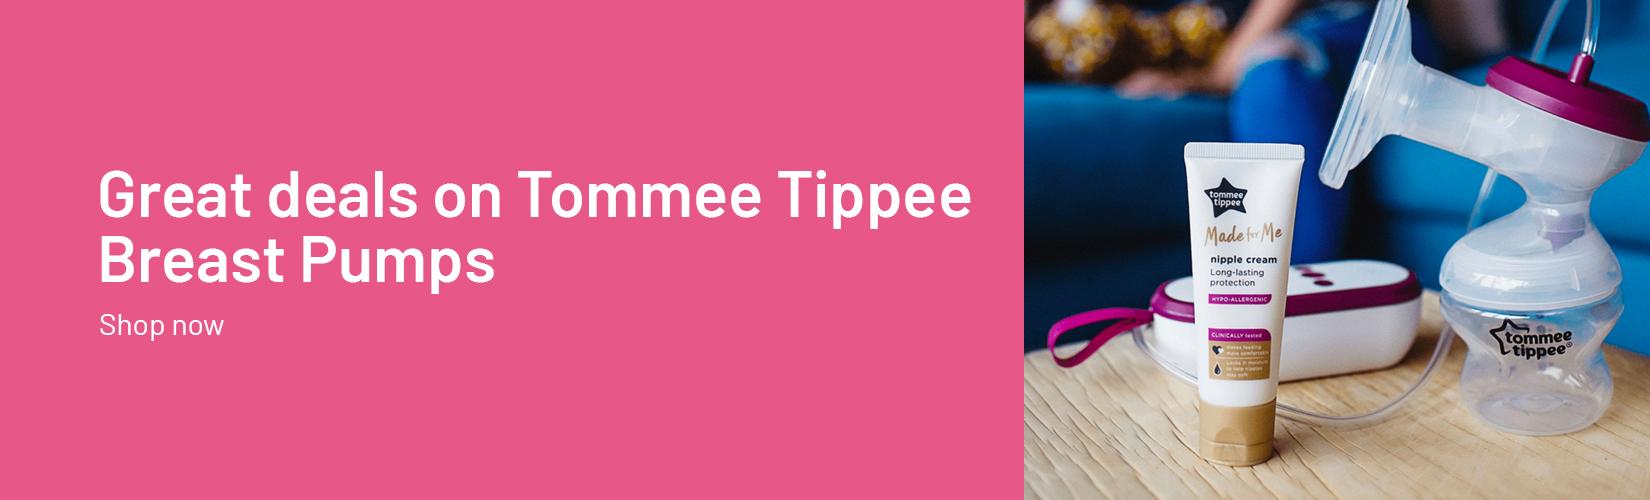 Great deals on Tommee Tippee breast pumps.